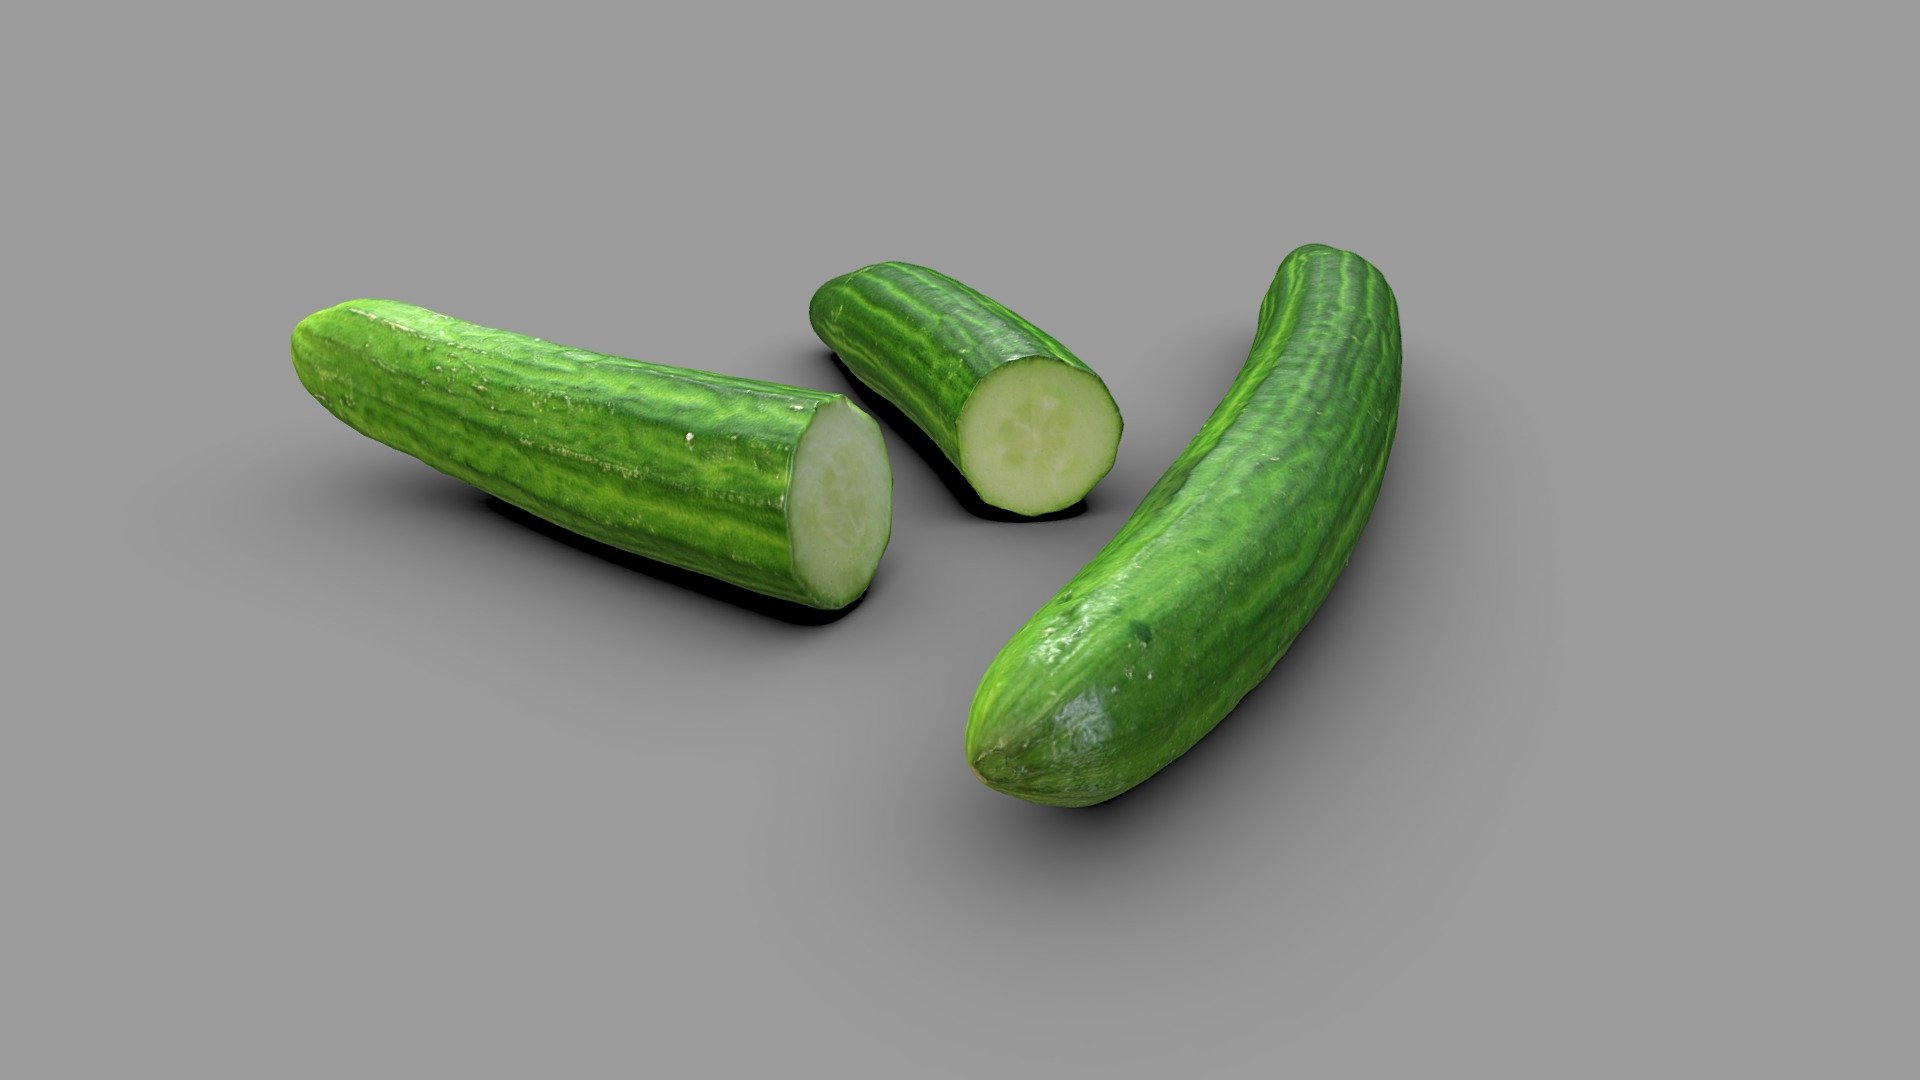 A cucumber and the same cucumber cut in two pieces.

Processed with Metashape + Blender + Instant meshes 3d model